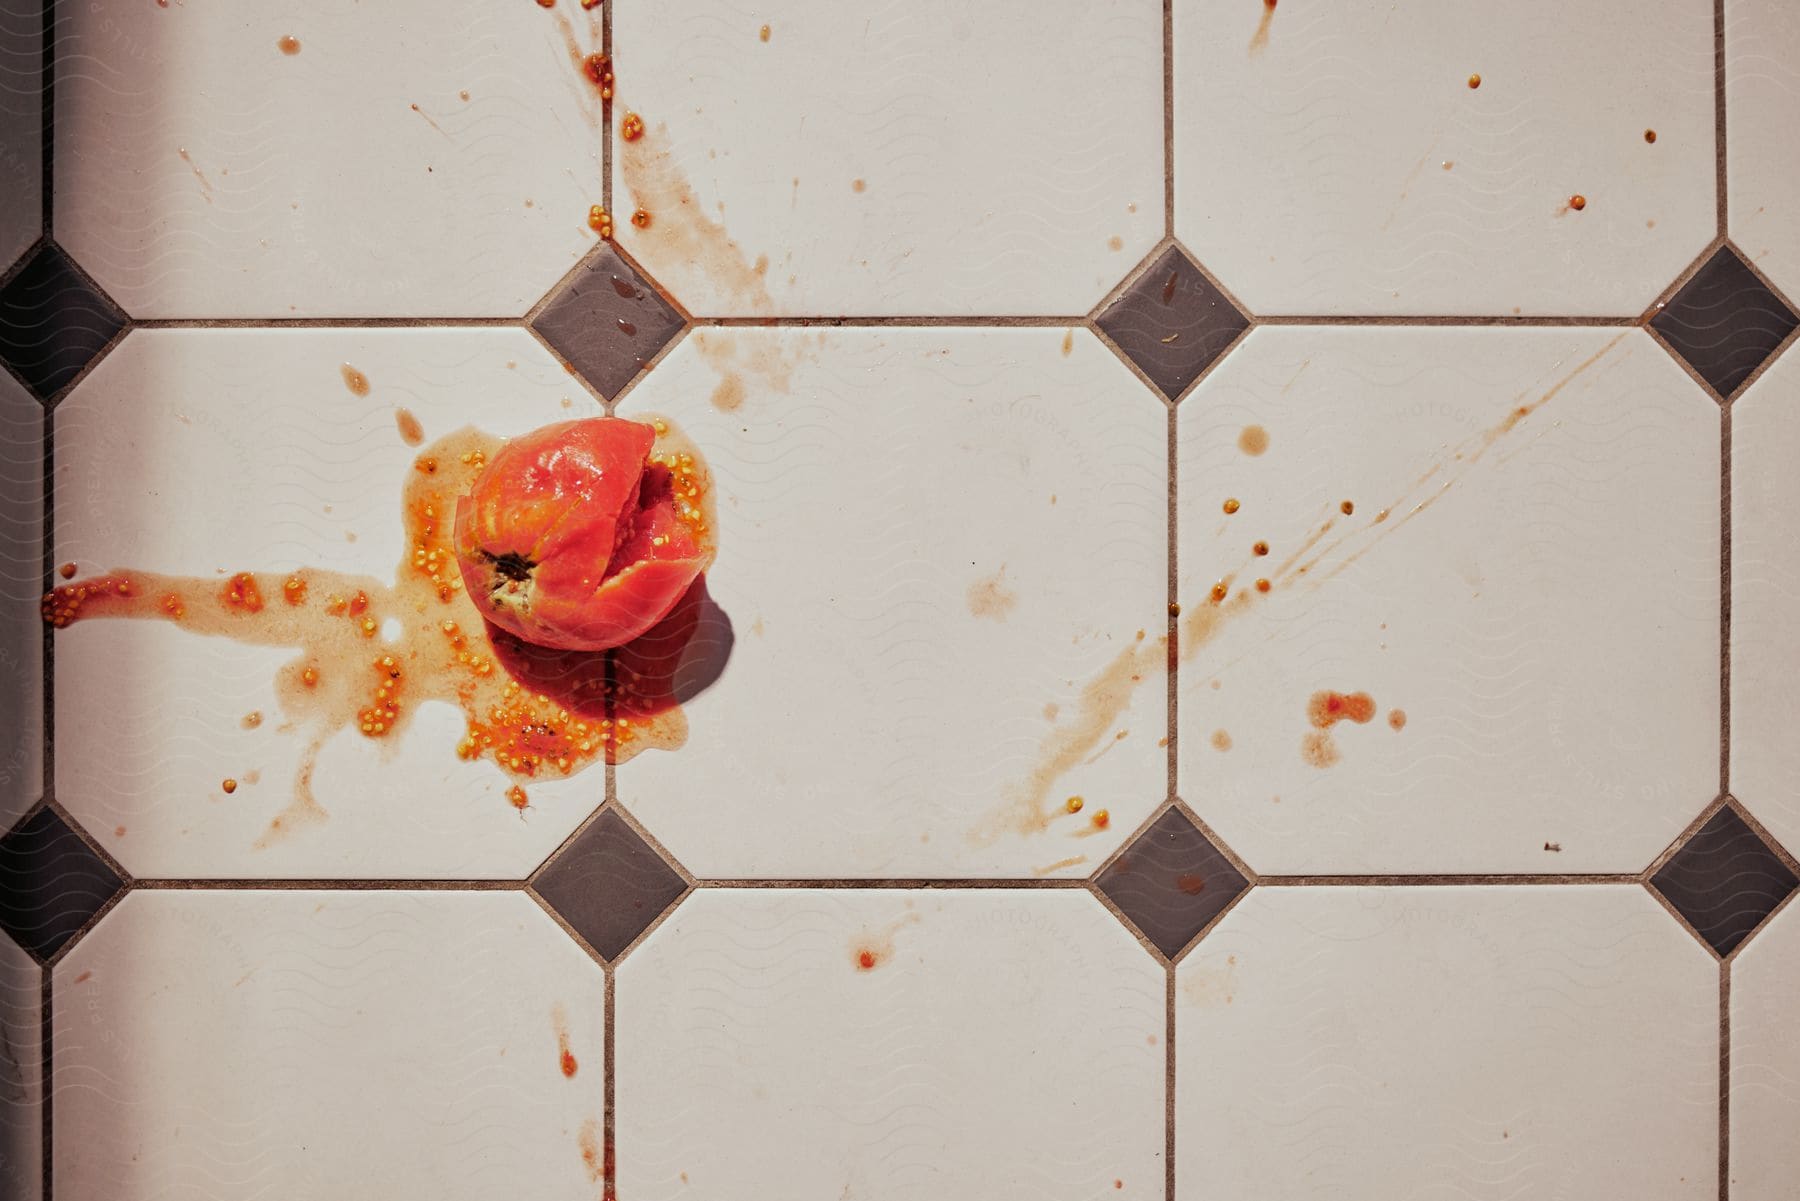 A smashed tomato is splattered on the floor